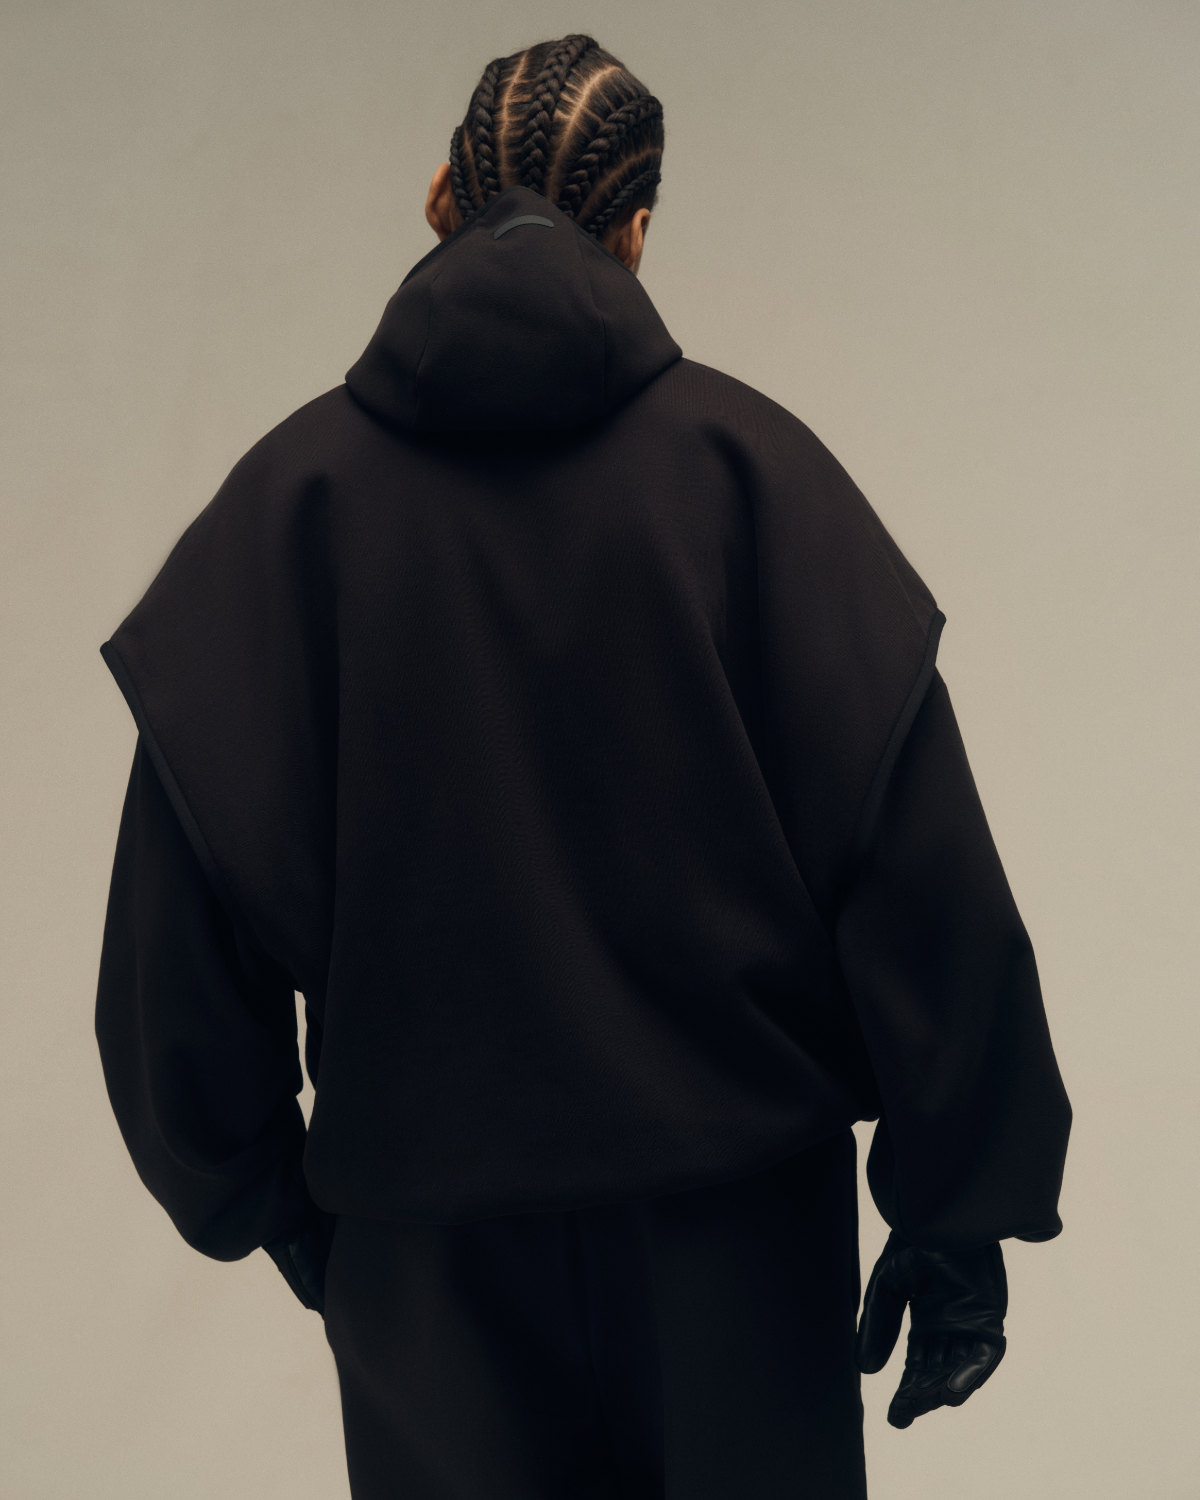 Fear Of God Athletics Reveals Its Spring Collection Of The 2023 - 2024 Opening Season